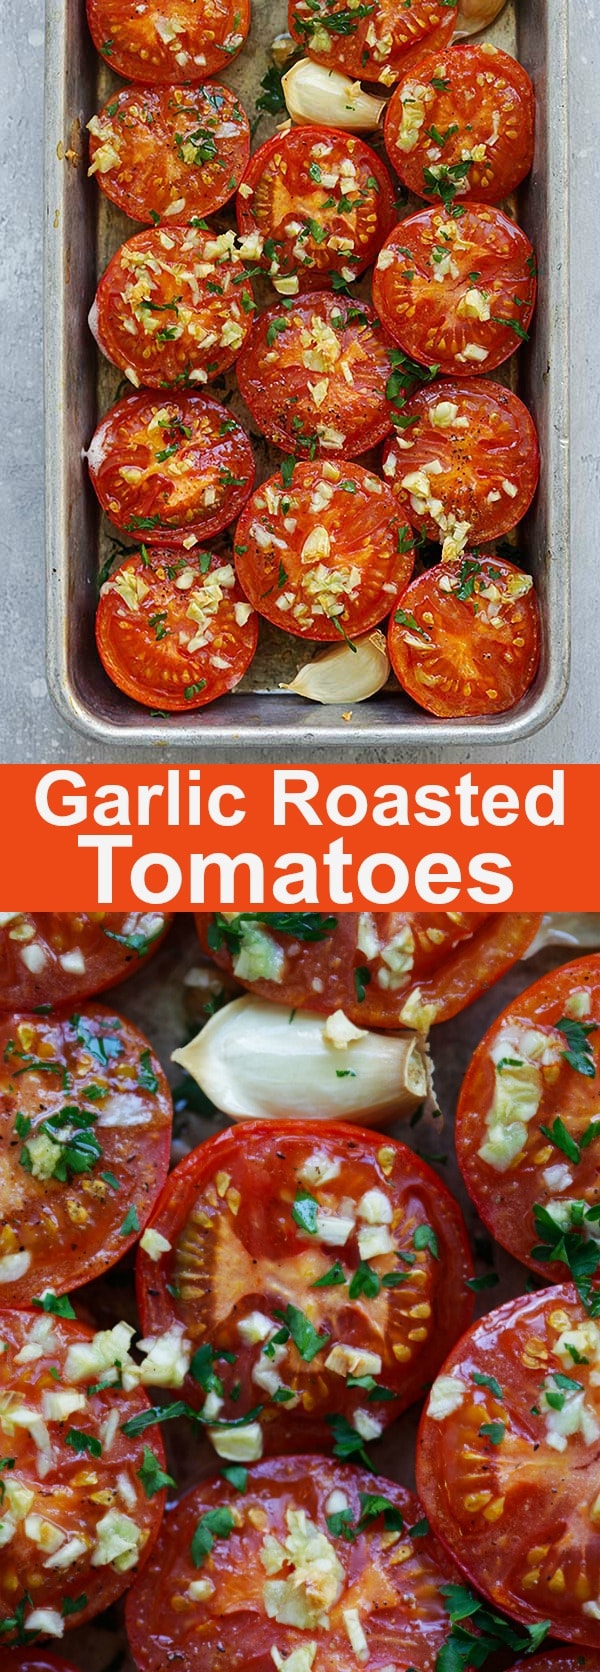 Garlic Roasted Tomatoes - easy and healthy roasted tomatoes topped with lots of garlic. So juicy and bursting with sweet and amazing flavors | rasamalaysia.com